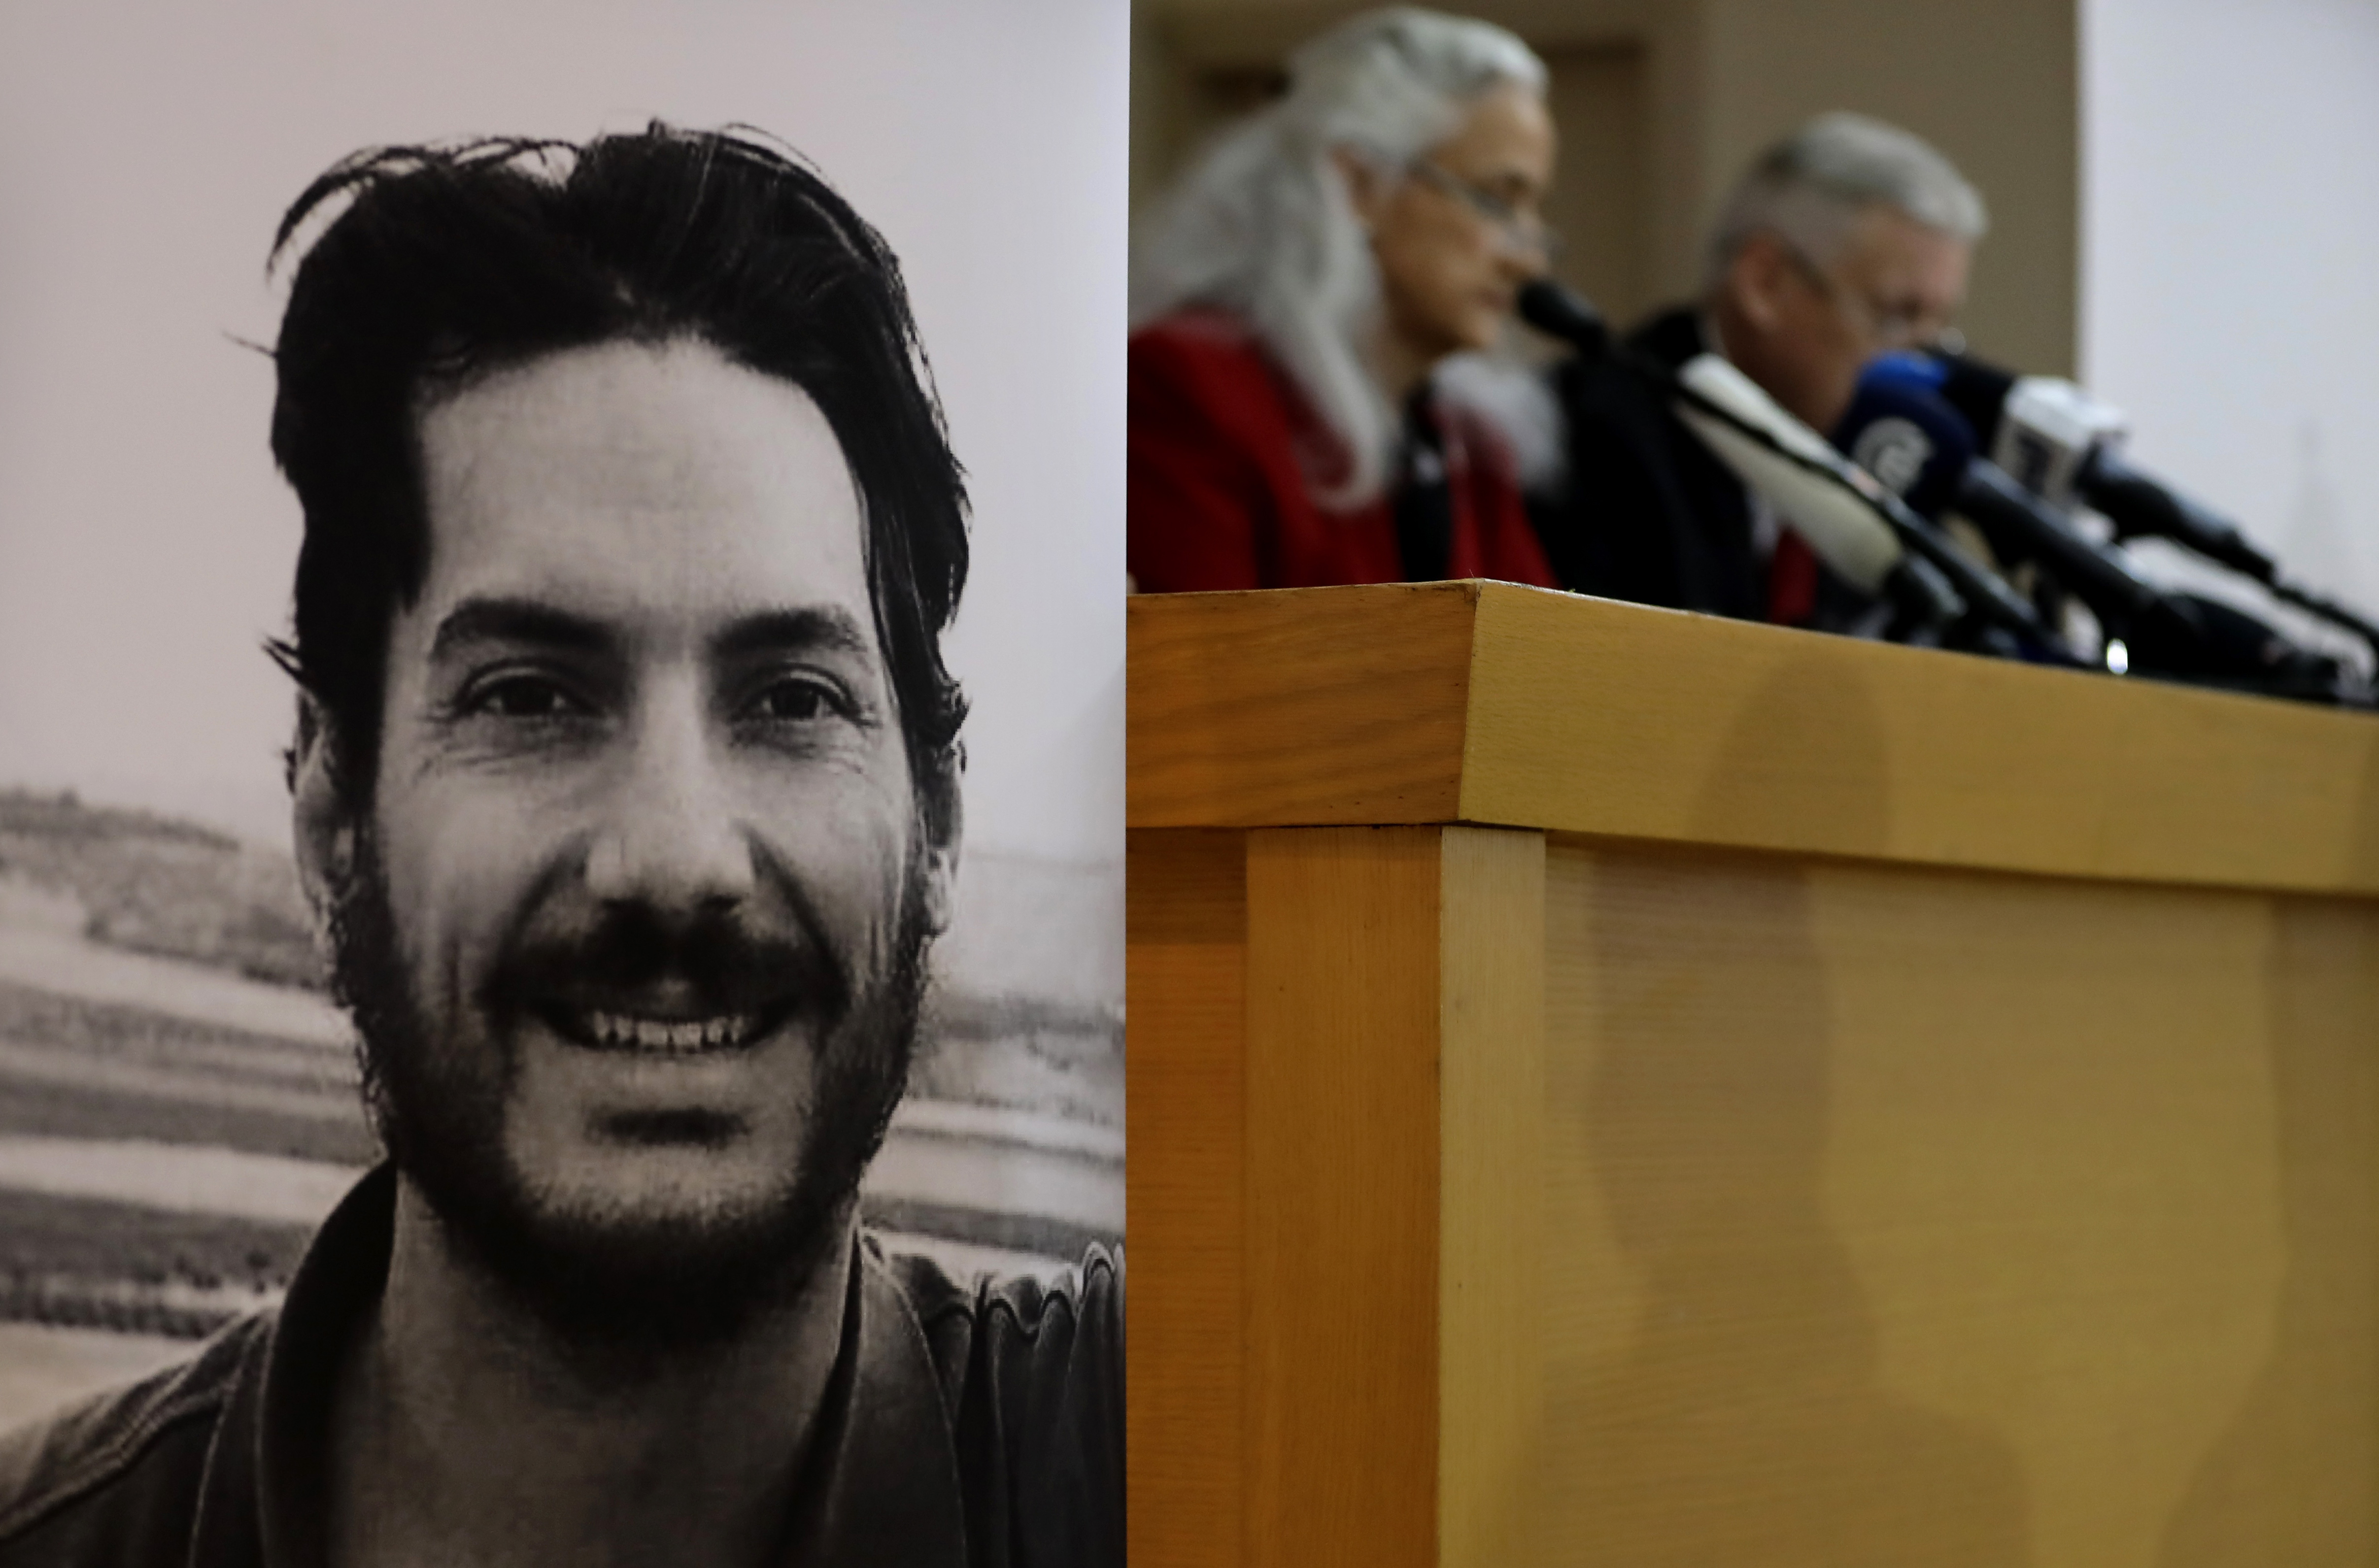 Marc and Debra Tice, the parents of US journalist Austin Tice (portrait L), who was abducted in Syria more than six years ago, give a press conference in the Lebanese capital Beirut on December 4, 2018. - They said they were very encouraged by the level of cooperation of US President Donald Trump's administration and new information about their son's fate. Tice, 37, disappeared in August 2012 near Damascus and his whereabouts remain a mystery. But Trump's special envoy for hostage affairs, Robert O'Brien, said last month there was every reason to believe the journalist was alive and still detained in Syria.